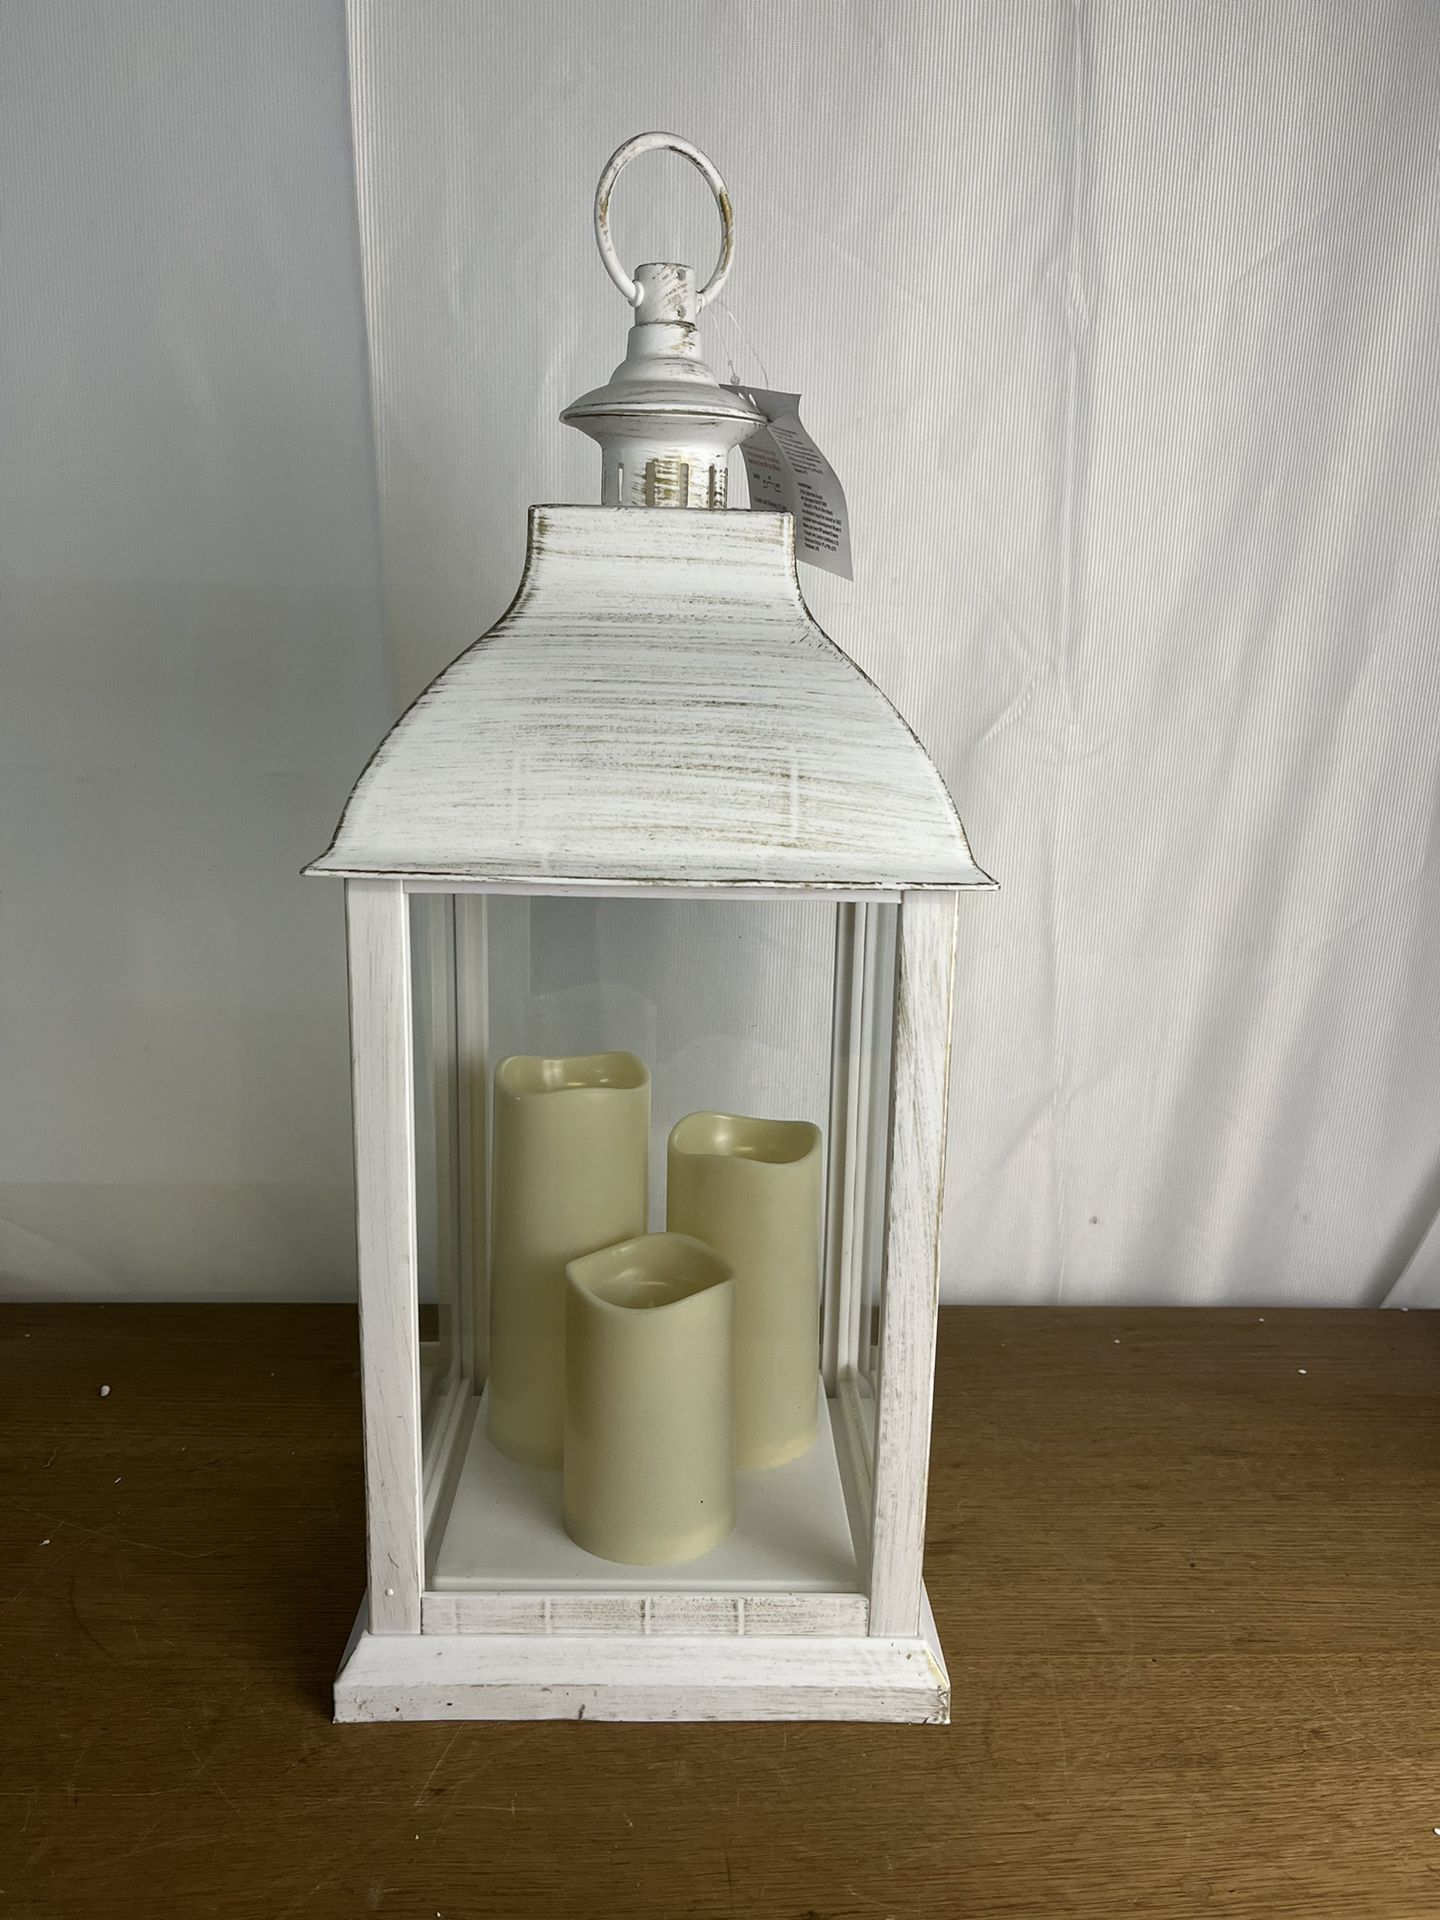 22" Tall Outdoor Battery-Operated Lantern with LED Lights, White